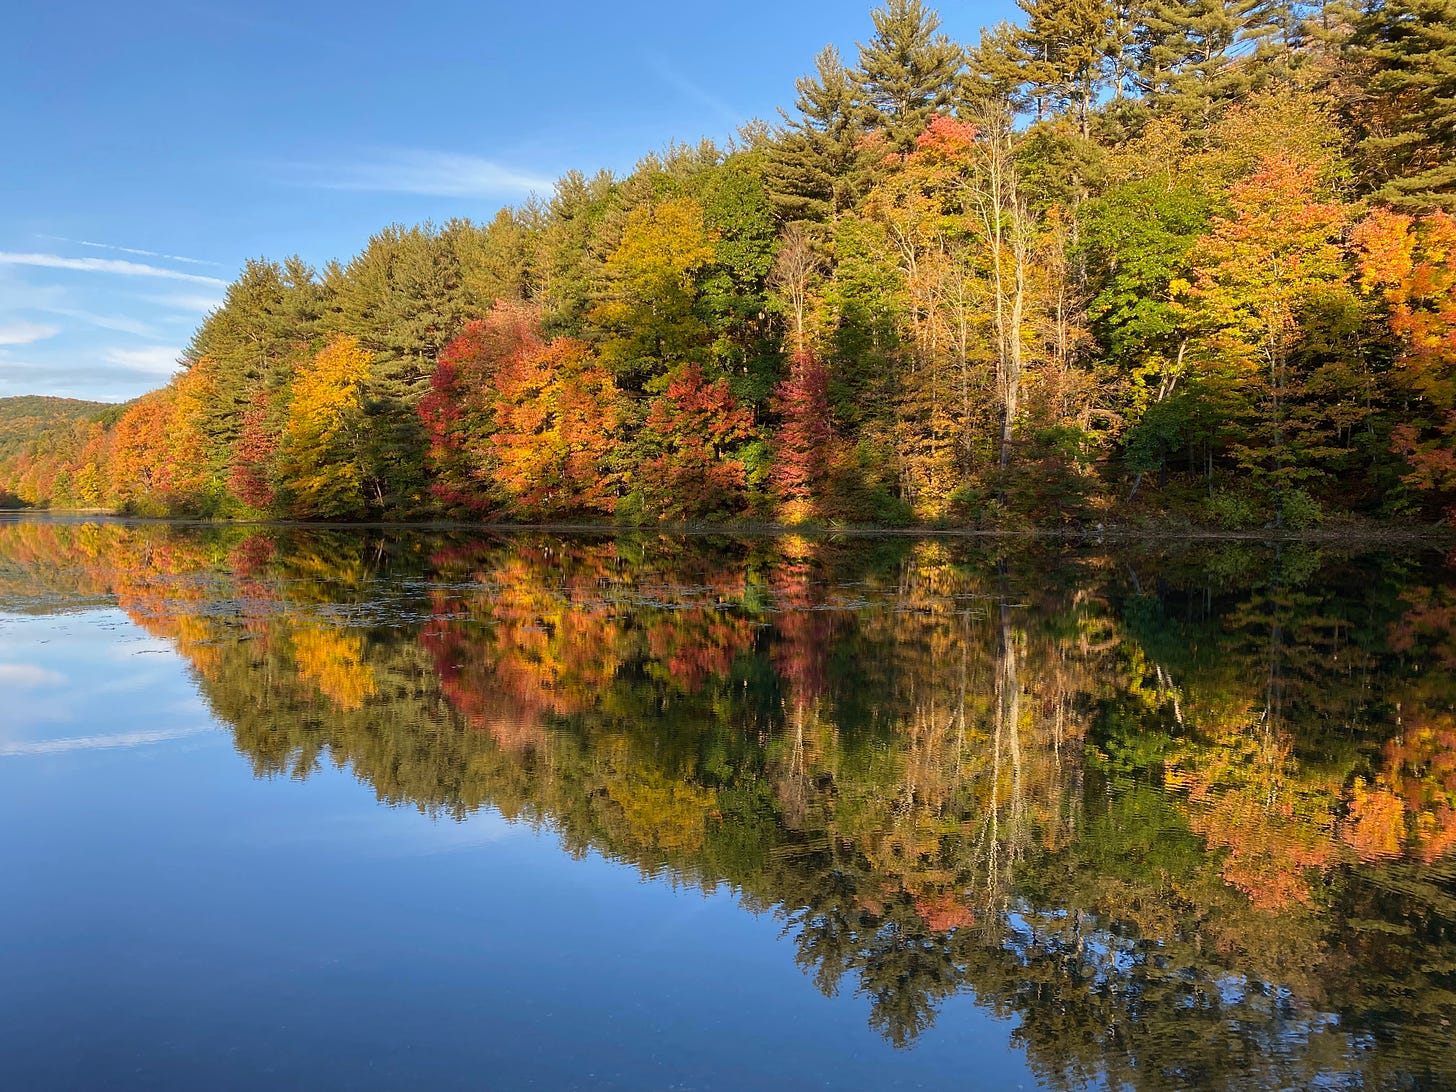 A forest of brilliant gold, orange, red, yellow, and green trees on the edge of a lake; the trees are reflected in the still water, as is the bright blue sky.